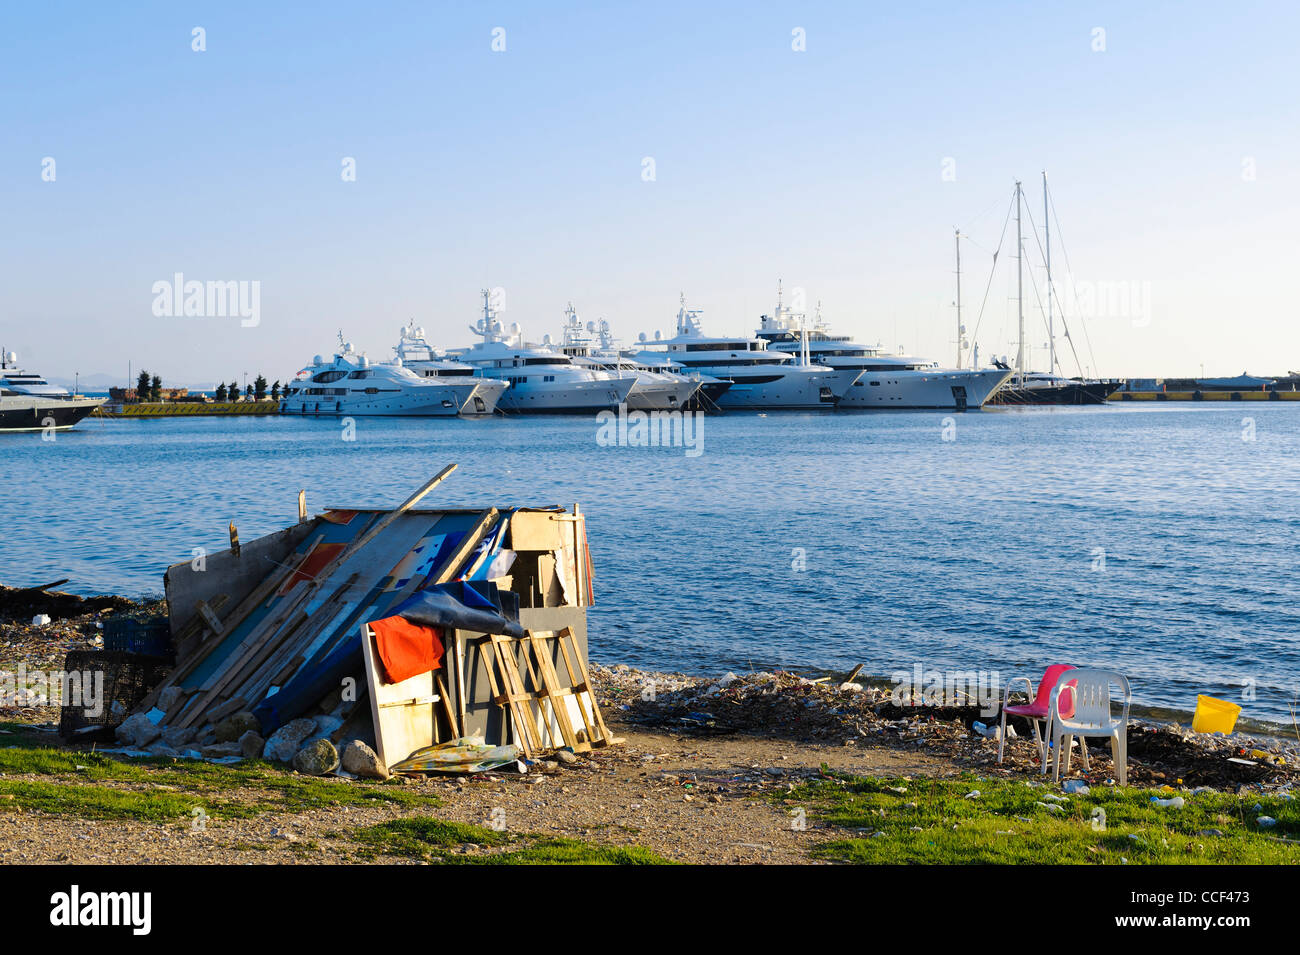 Hut at the beach in front of Super Yachts, Paleo Faliro, Athens, Greece, Europae Stock Photo